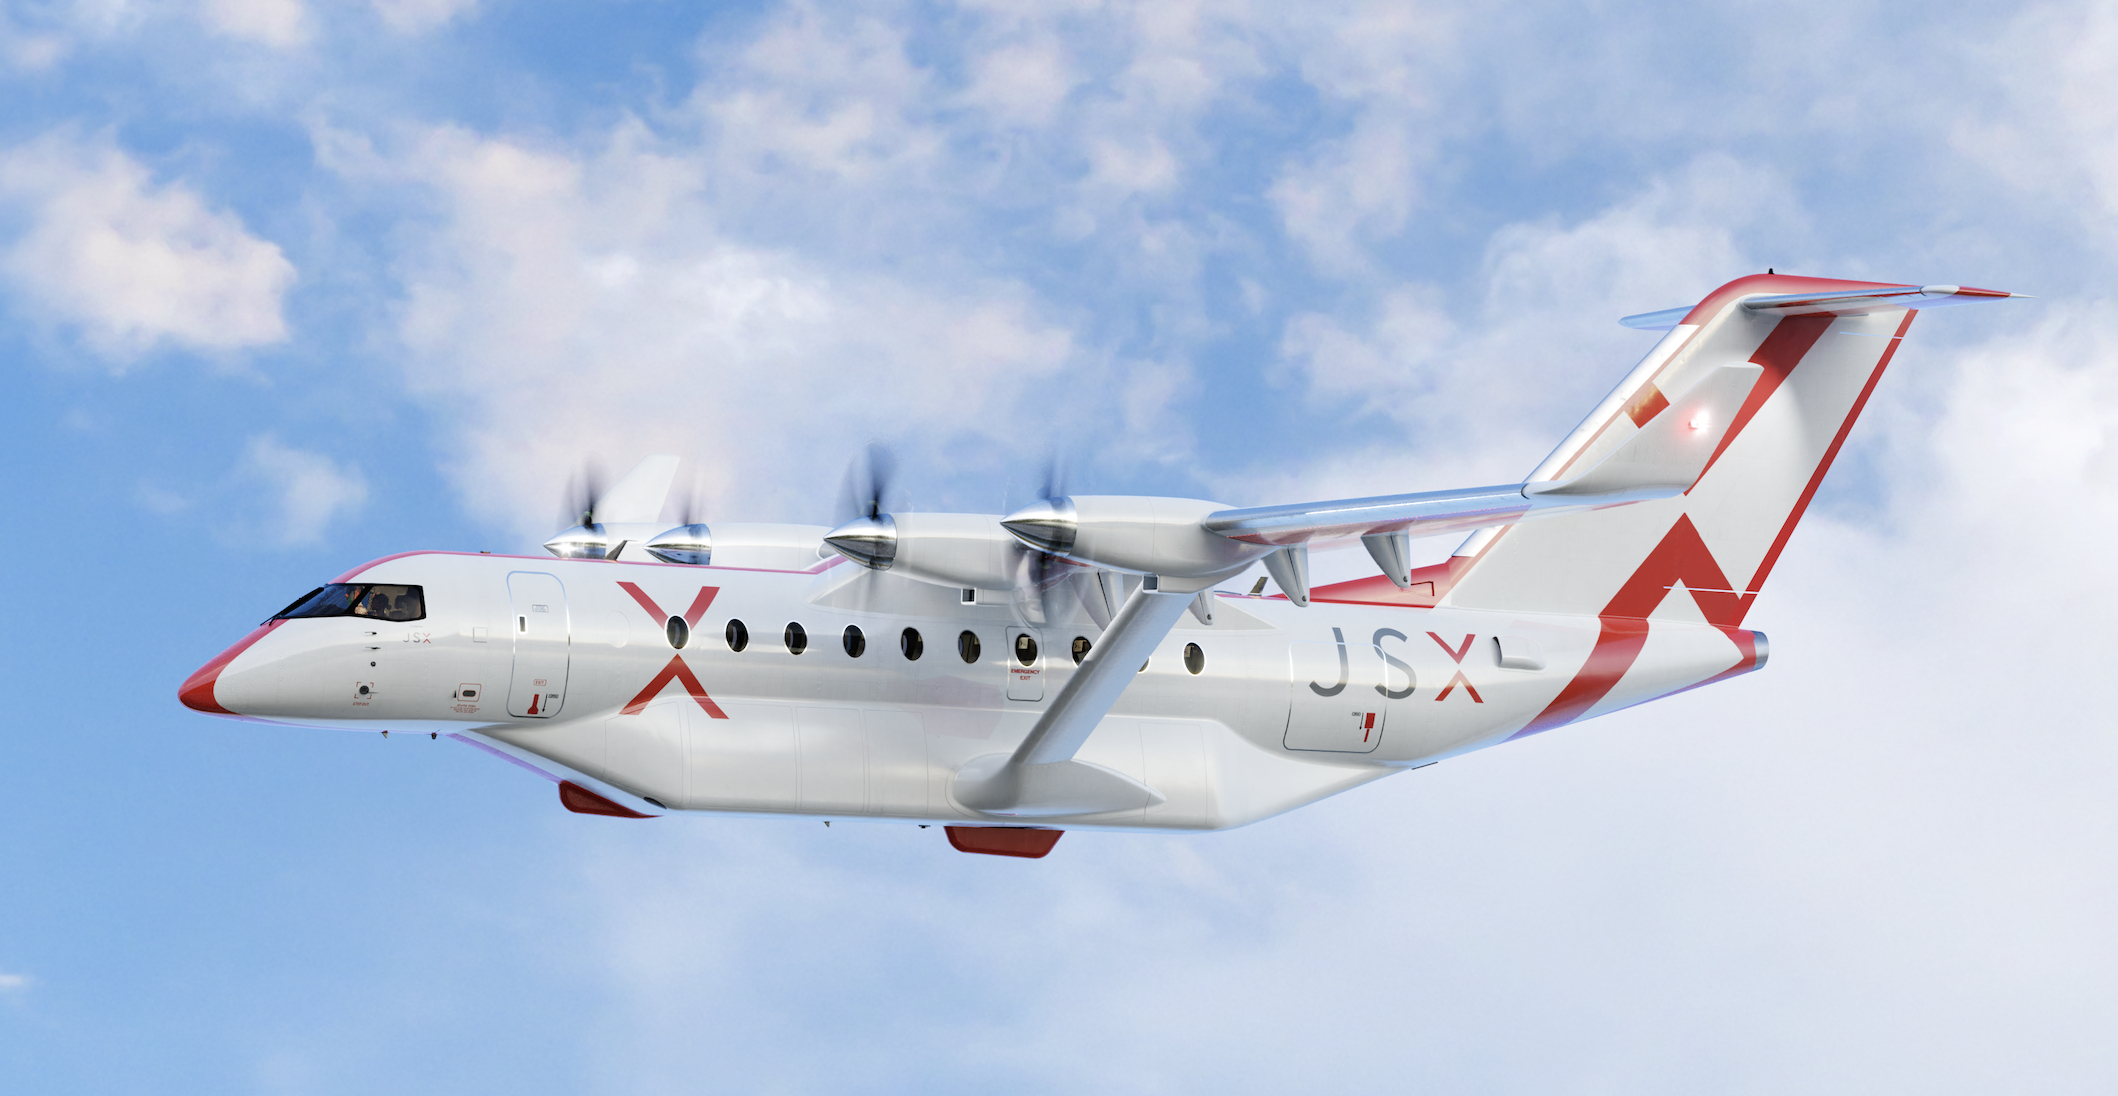 JSX Announces Intent To Acquire 332 Hybrid-Electric Aircraft